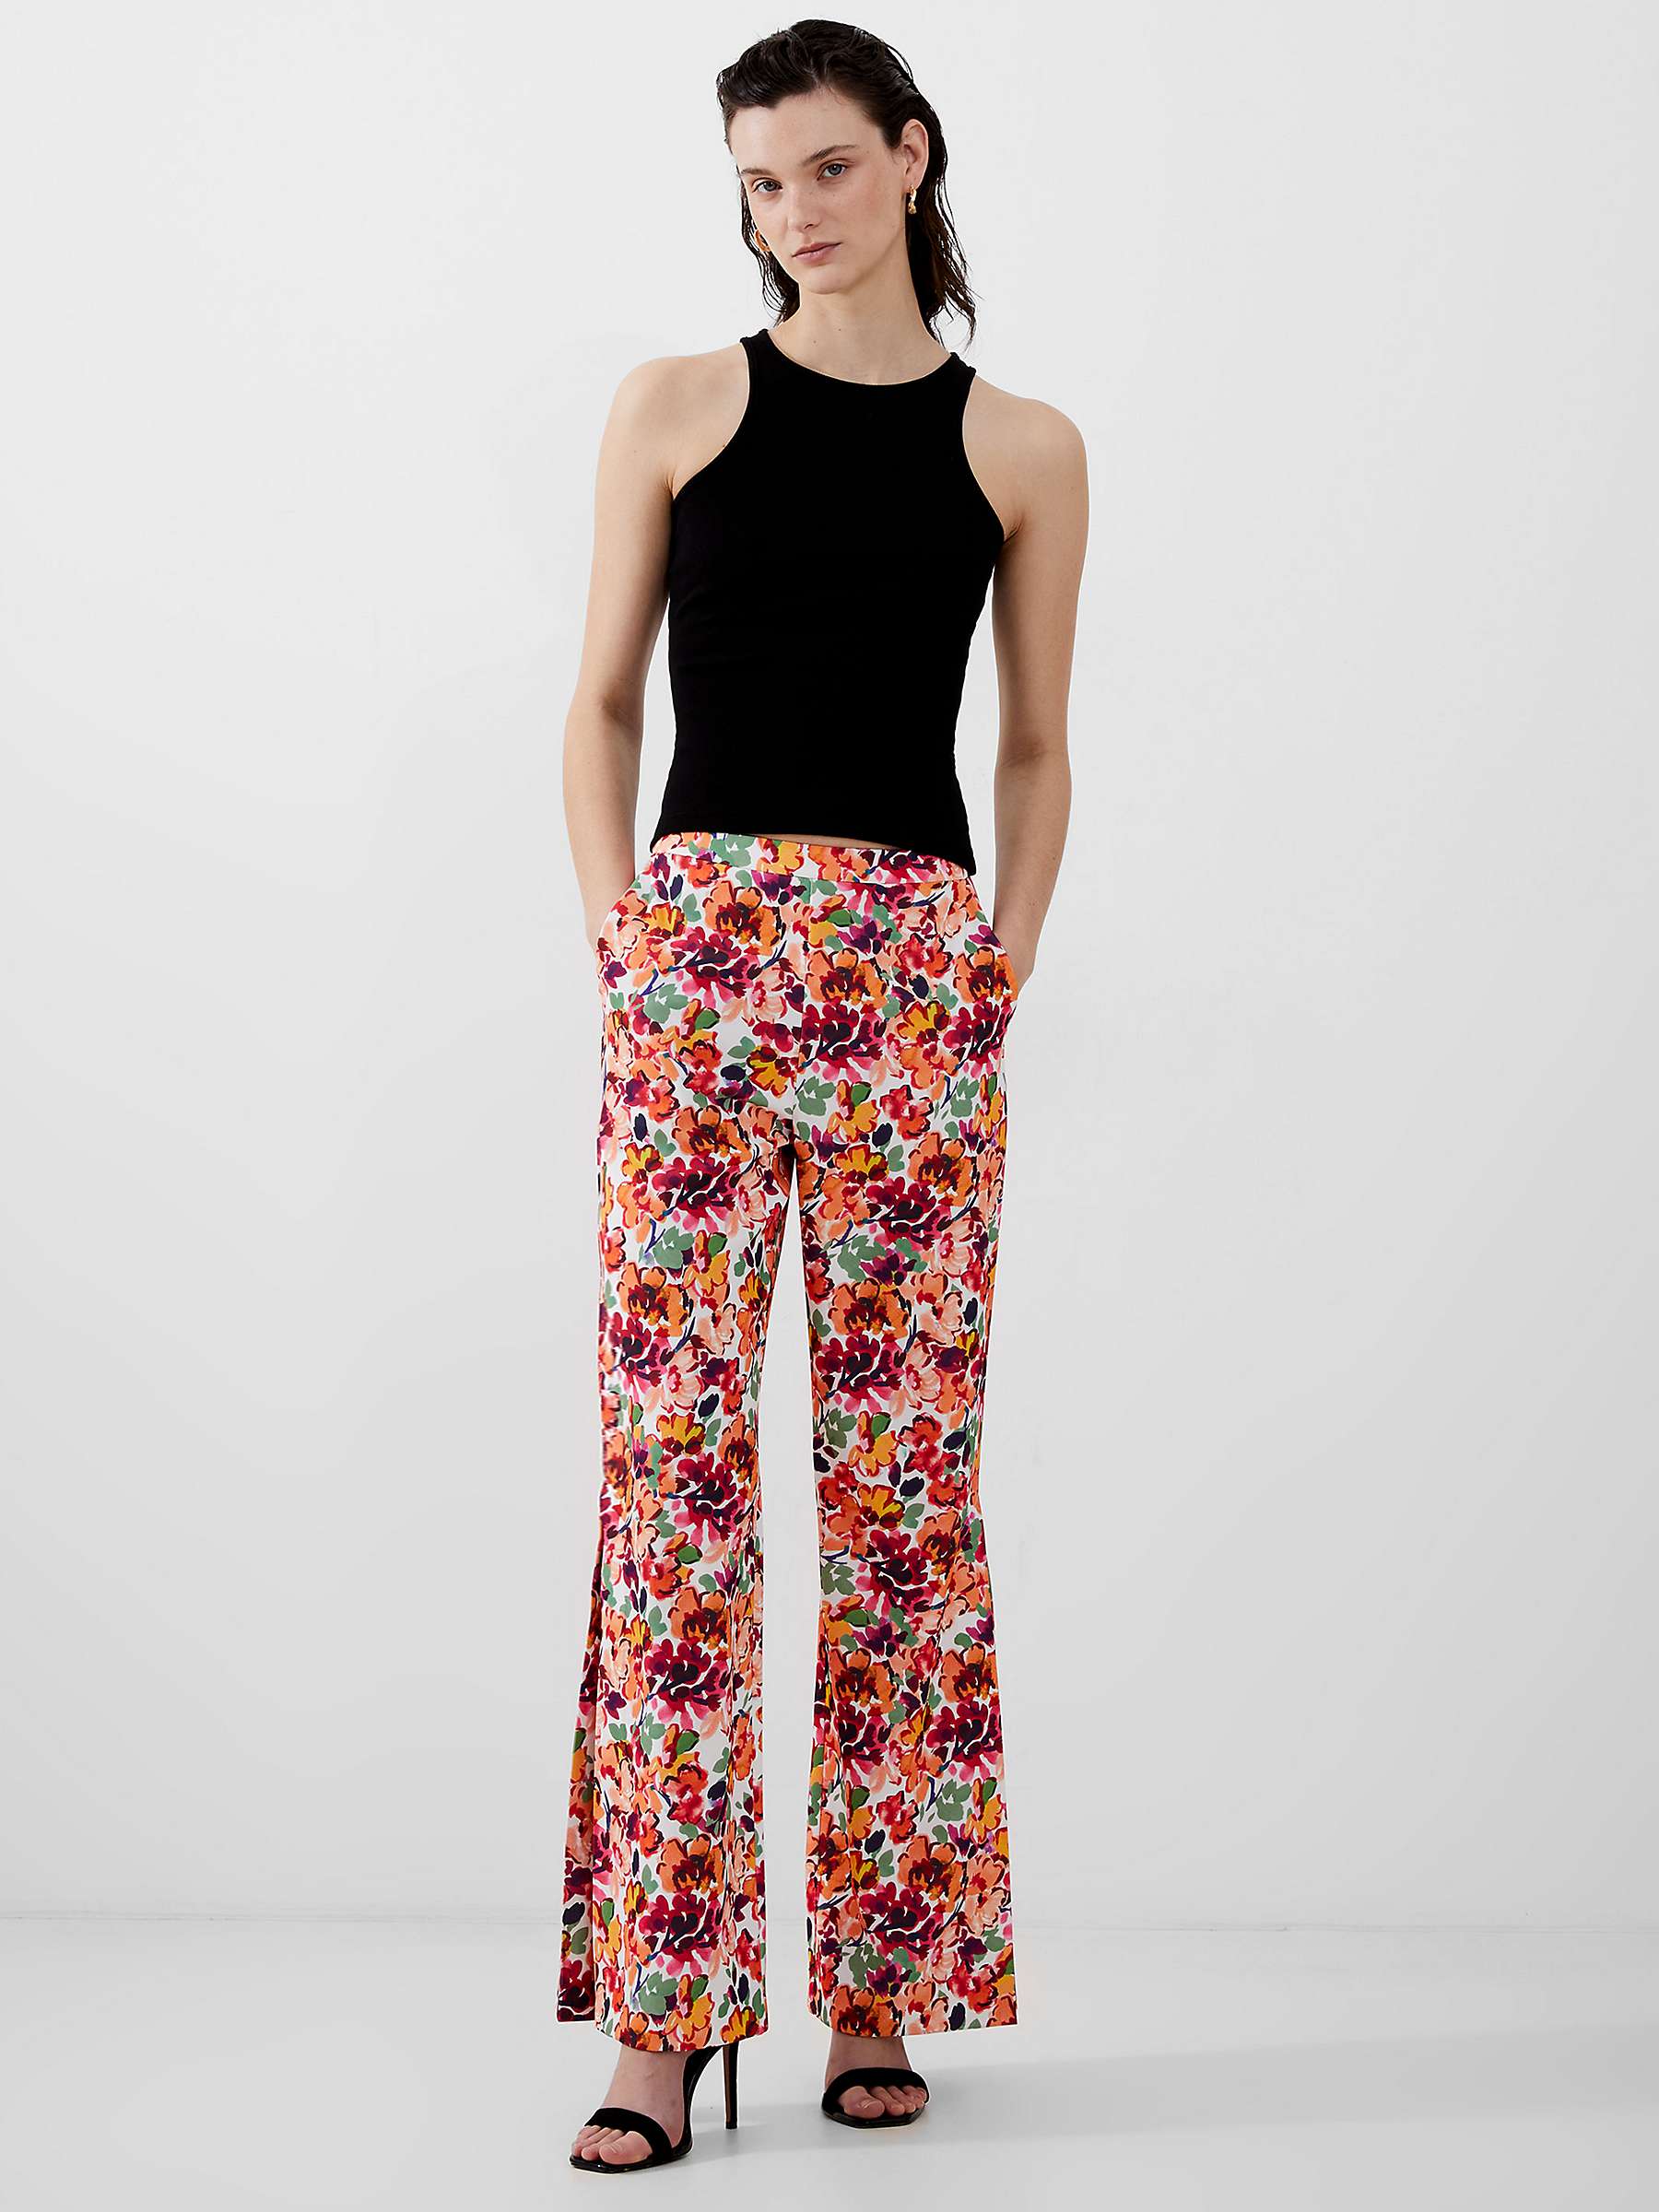 Buy French Connection Brenna Harrie Trousers, Melon Online at johnlewis.com